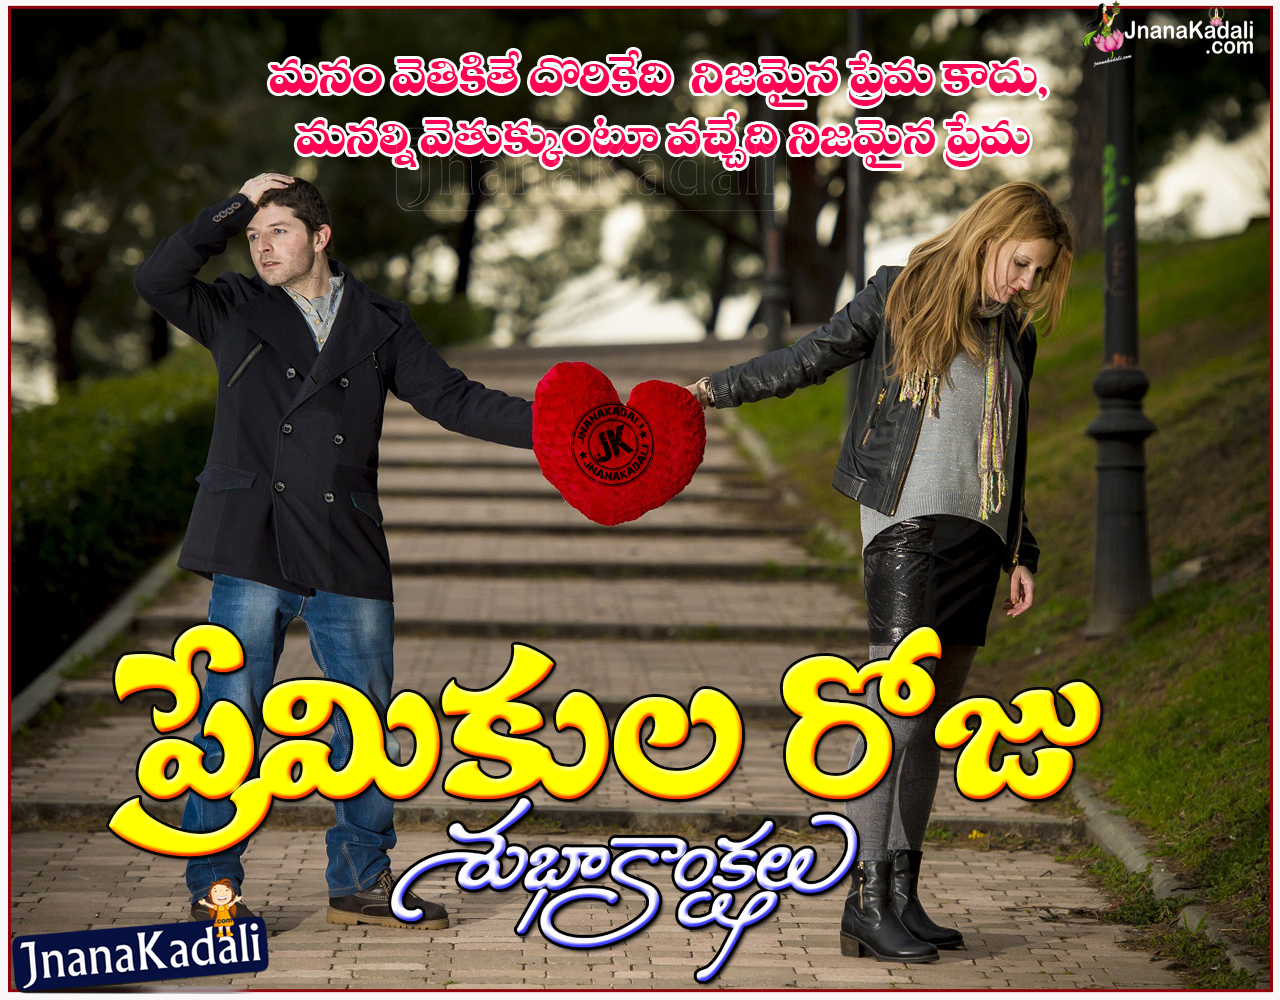 Telugu Beautiful Love Good Morning Wishes and Greetings for ...